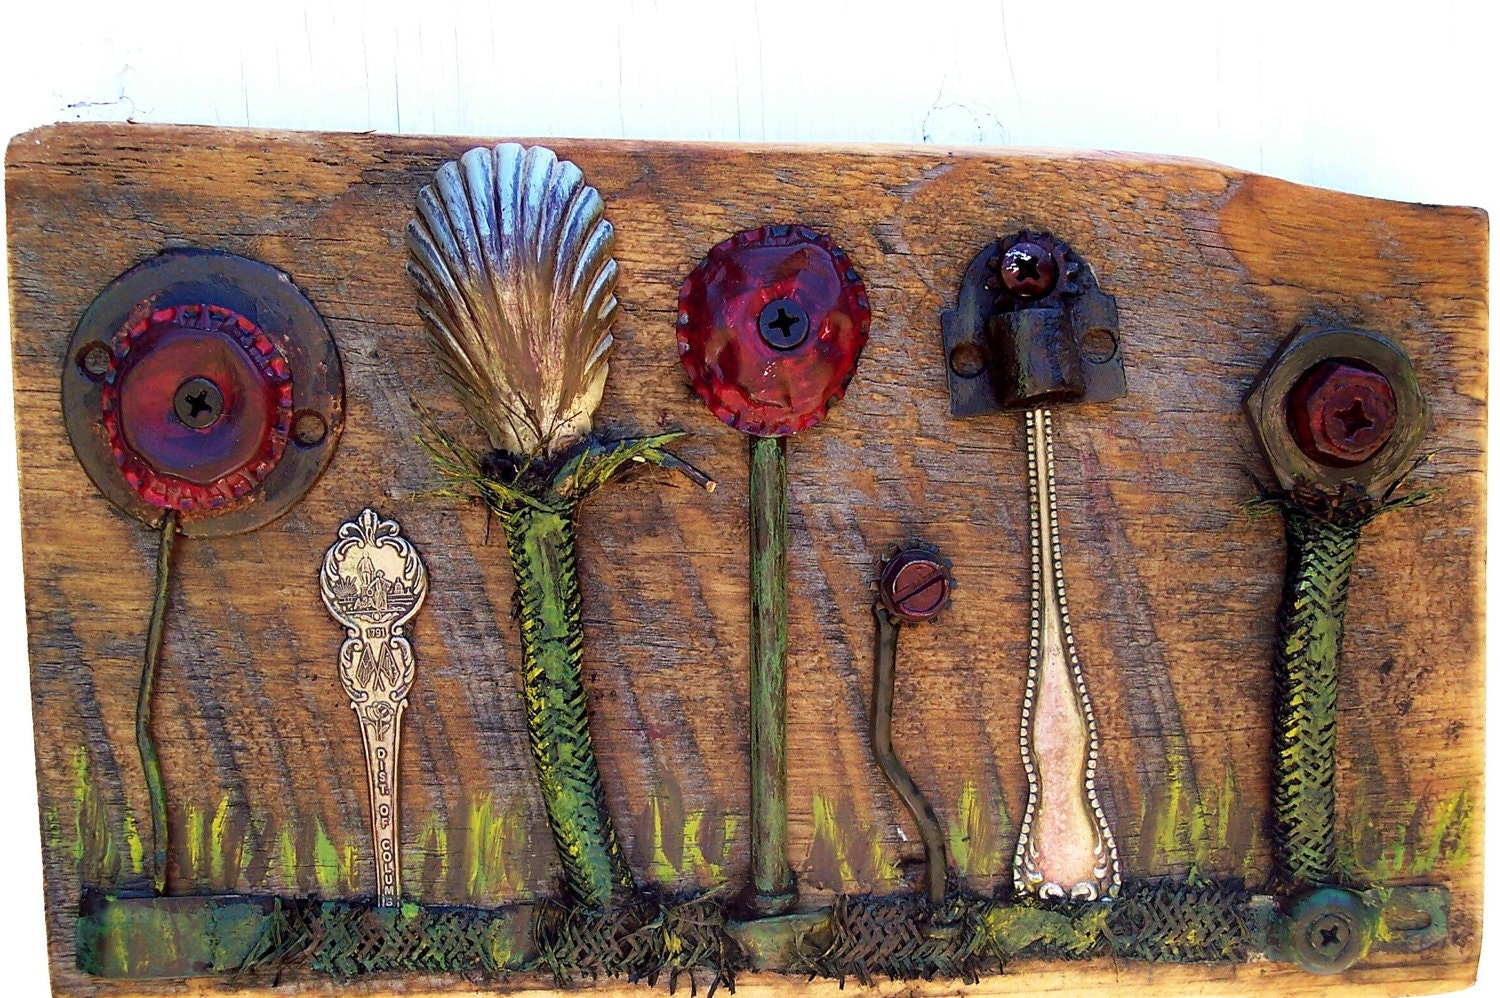 Reclaimed art assemblage found objects Salvage art flowers